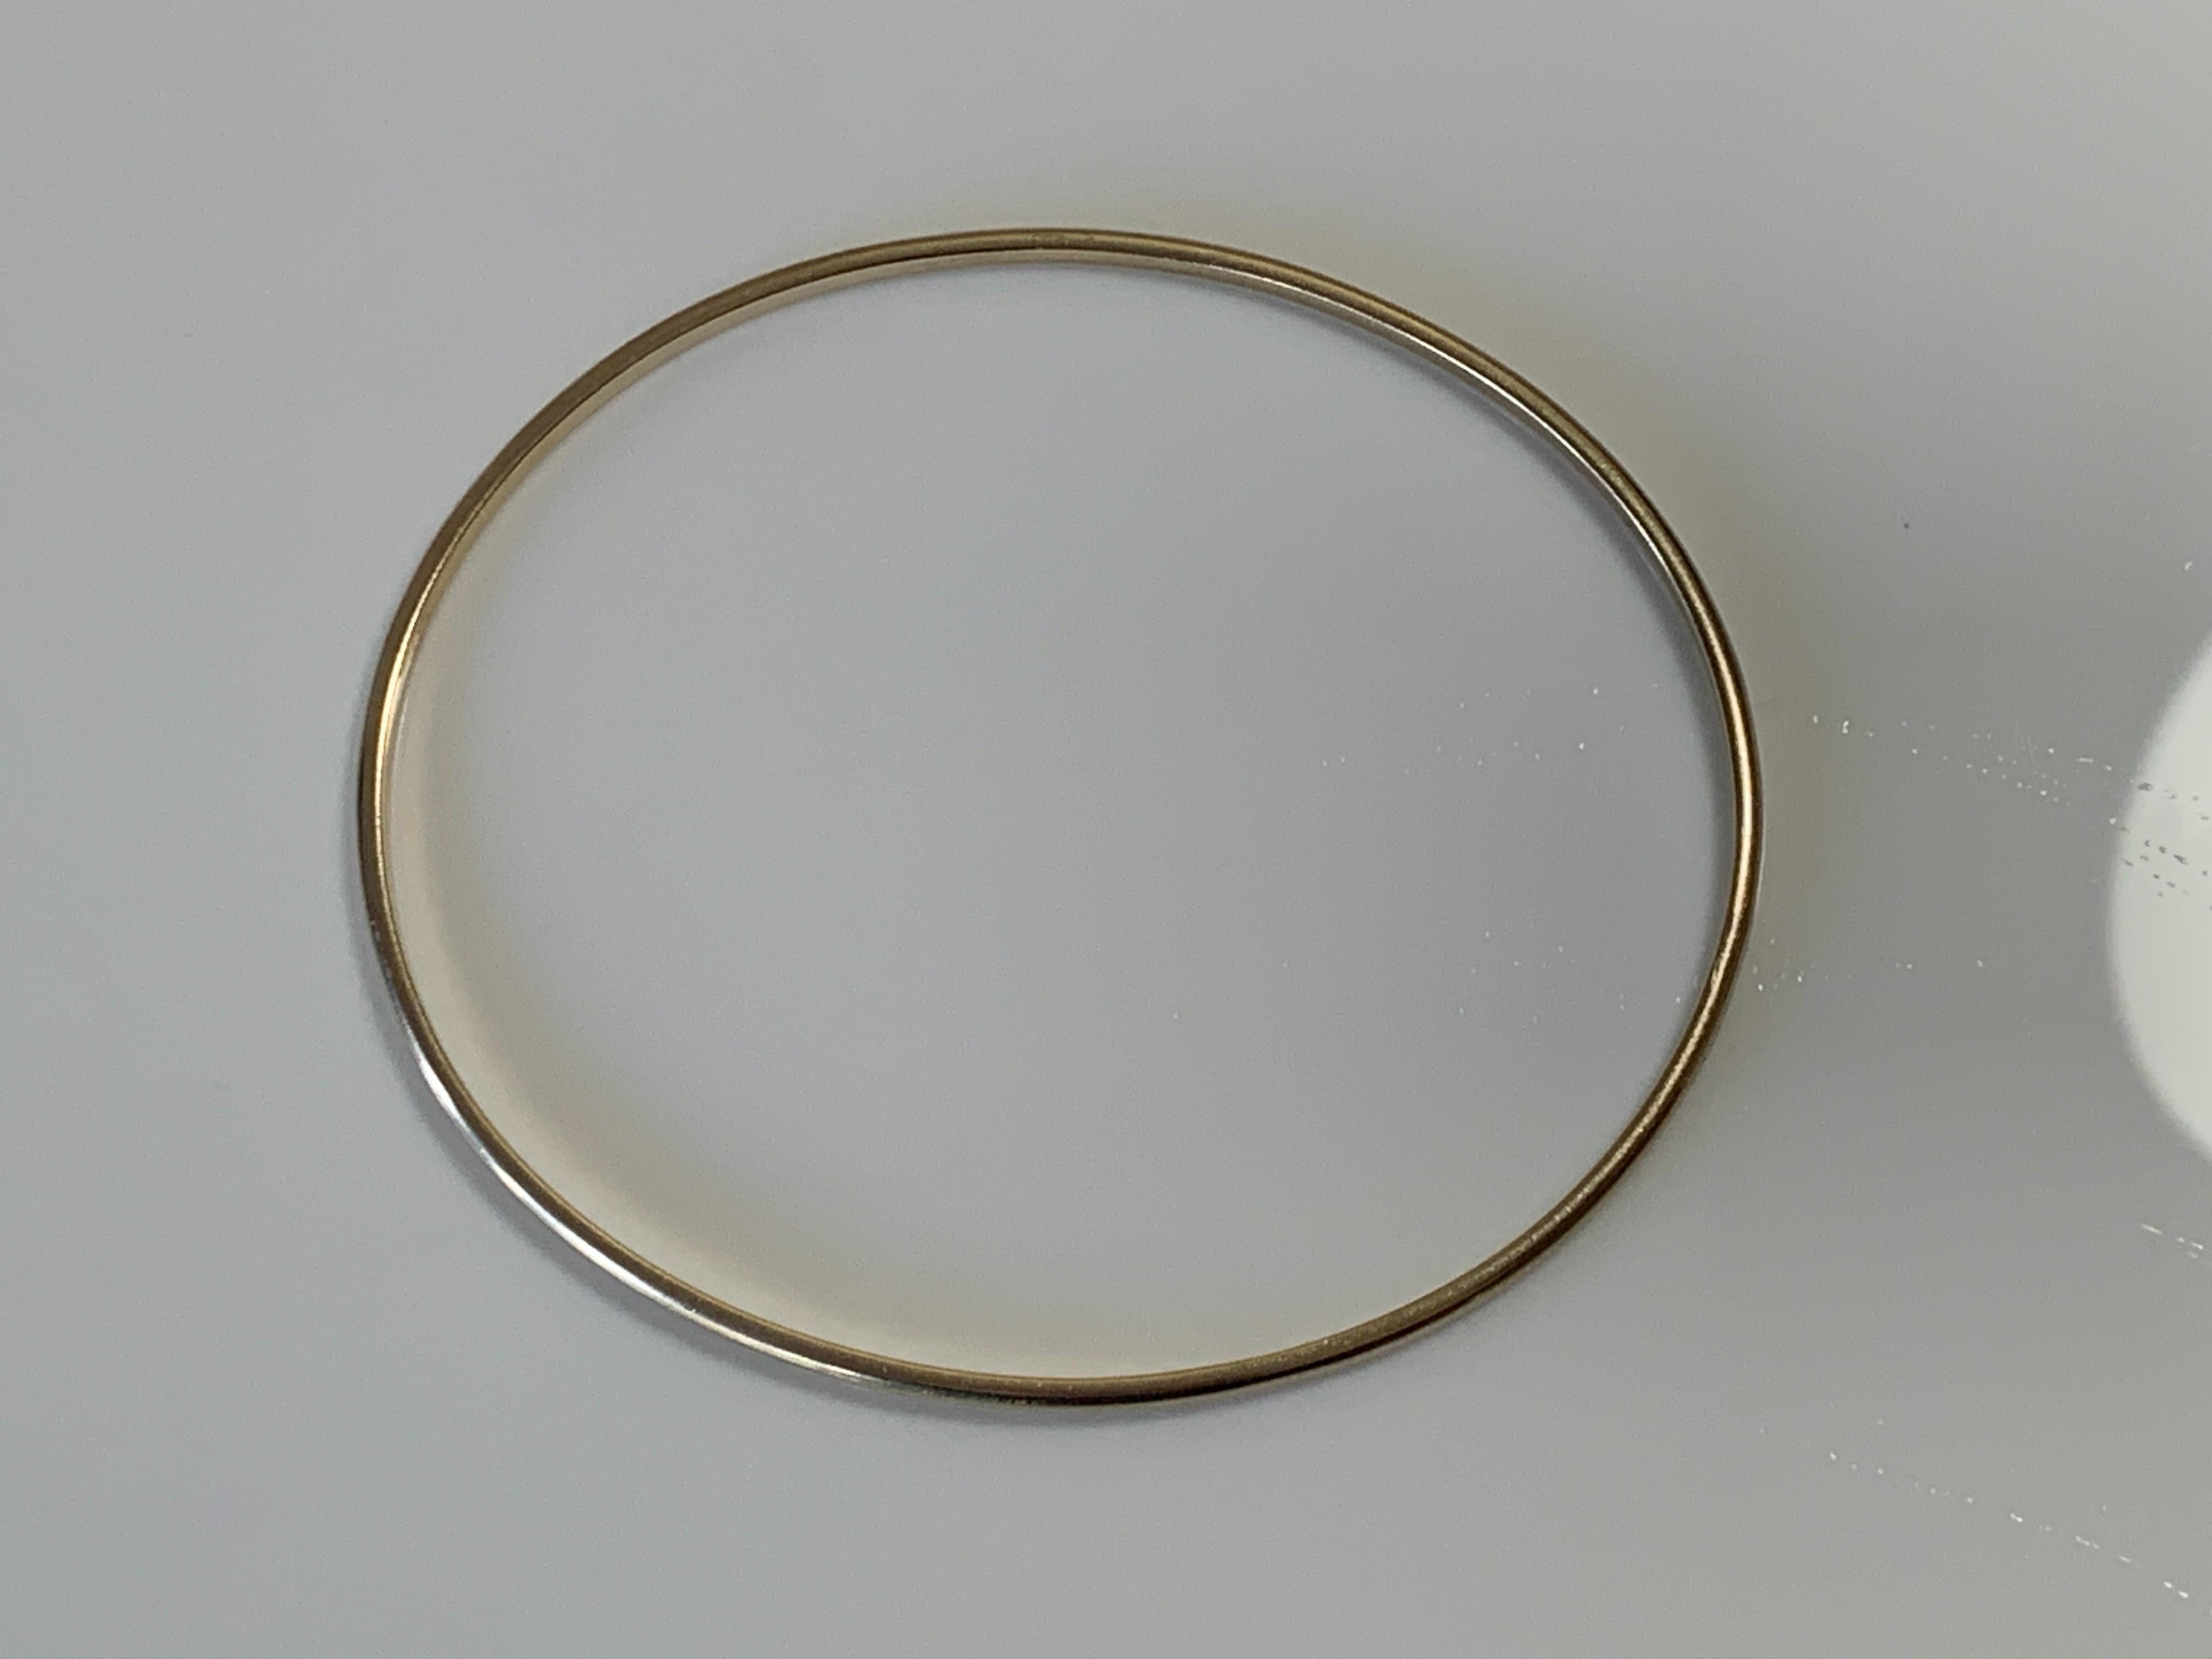 9ct Solid Gold Bangle
Oval shape 
Continual thickness of 2mm
Strong bangle not flimsy 
Full British Hallmarks 
unknown makers stamp 
Era 1980s